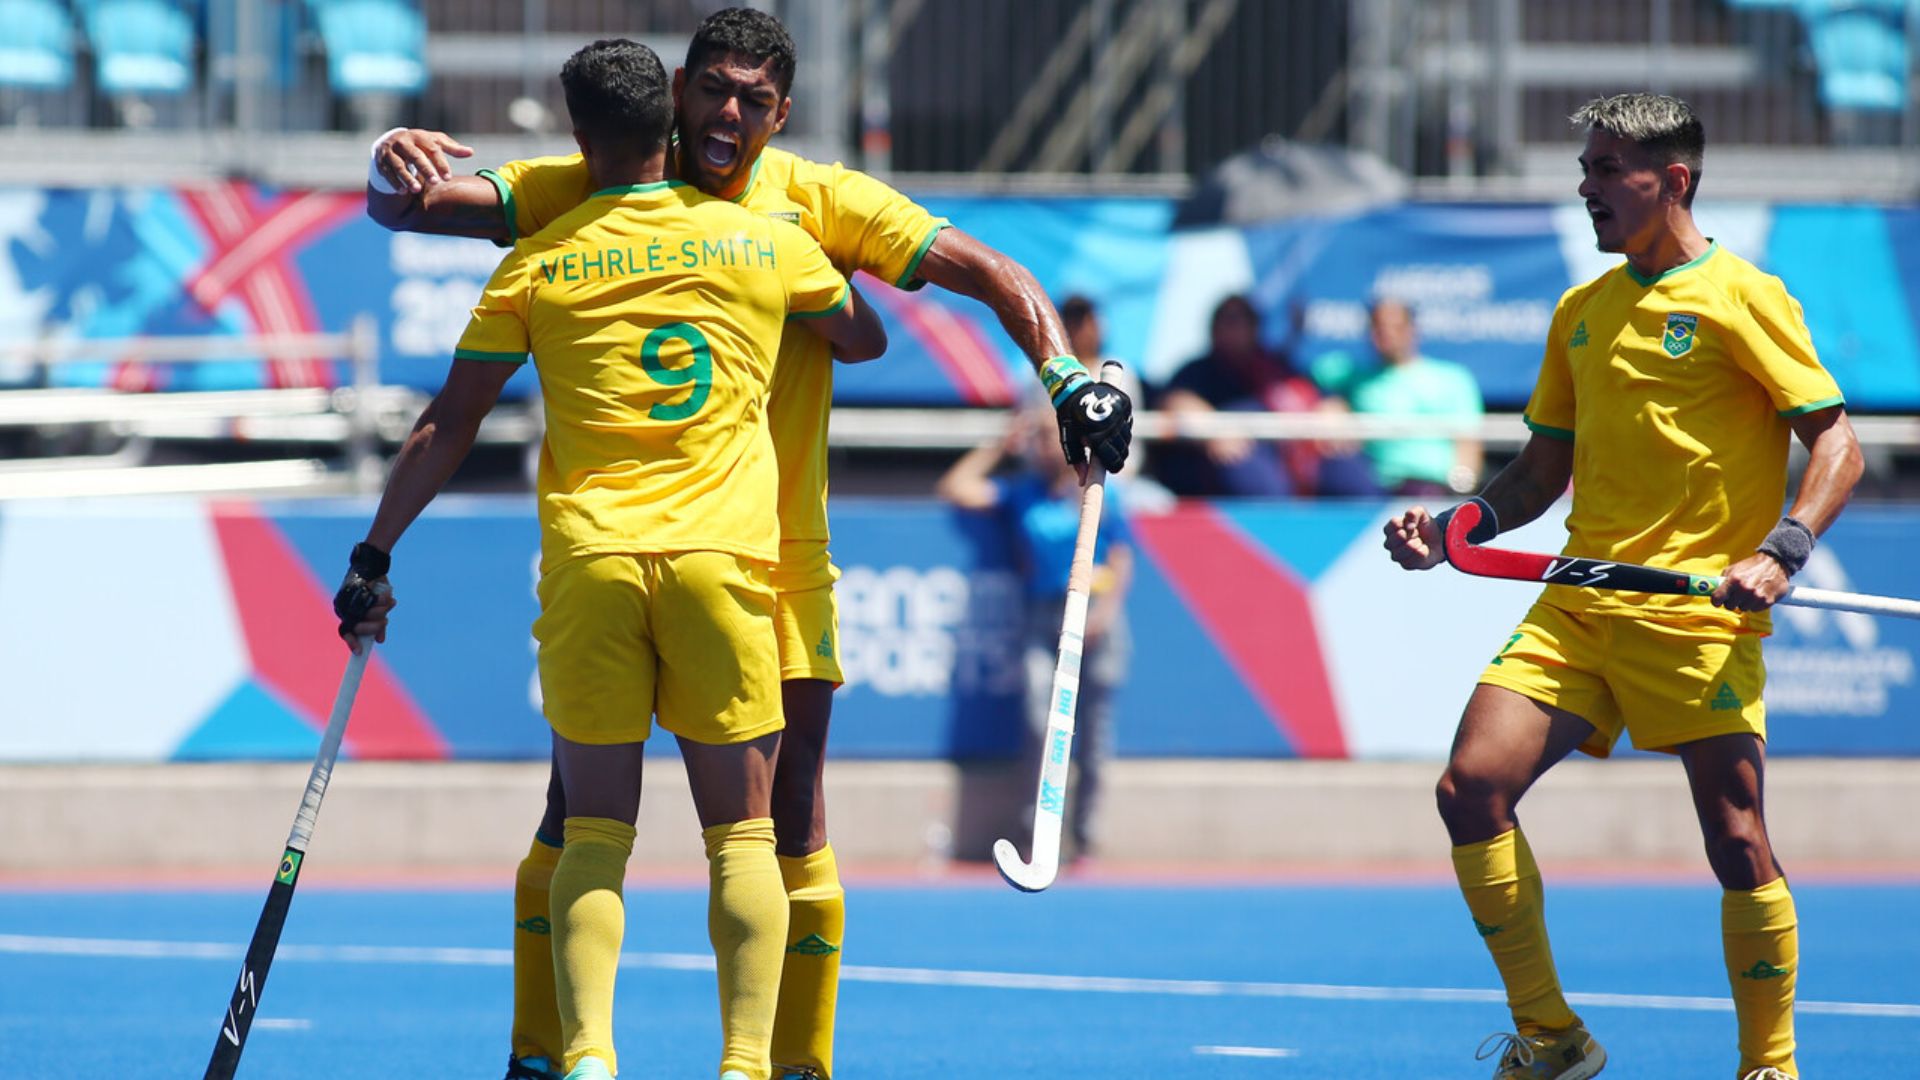 Brazil Secures Fifth Place in Male's Hockey